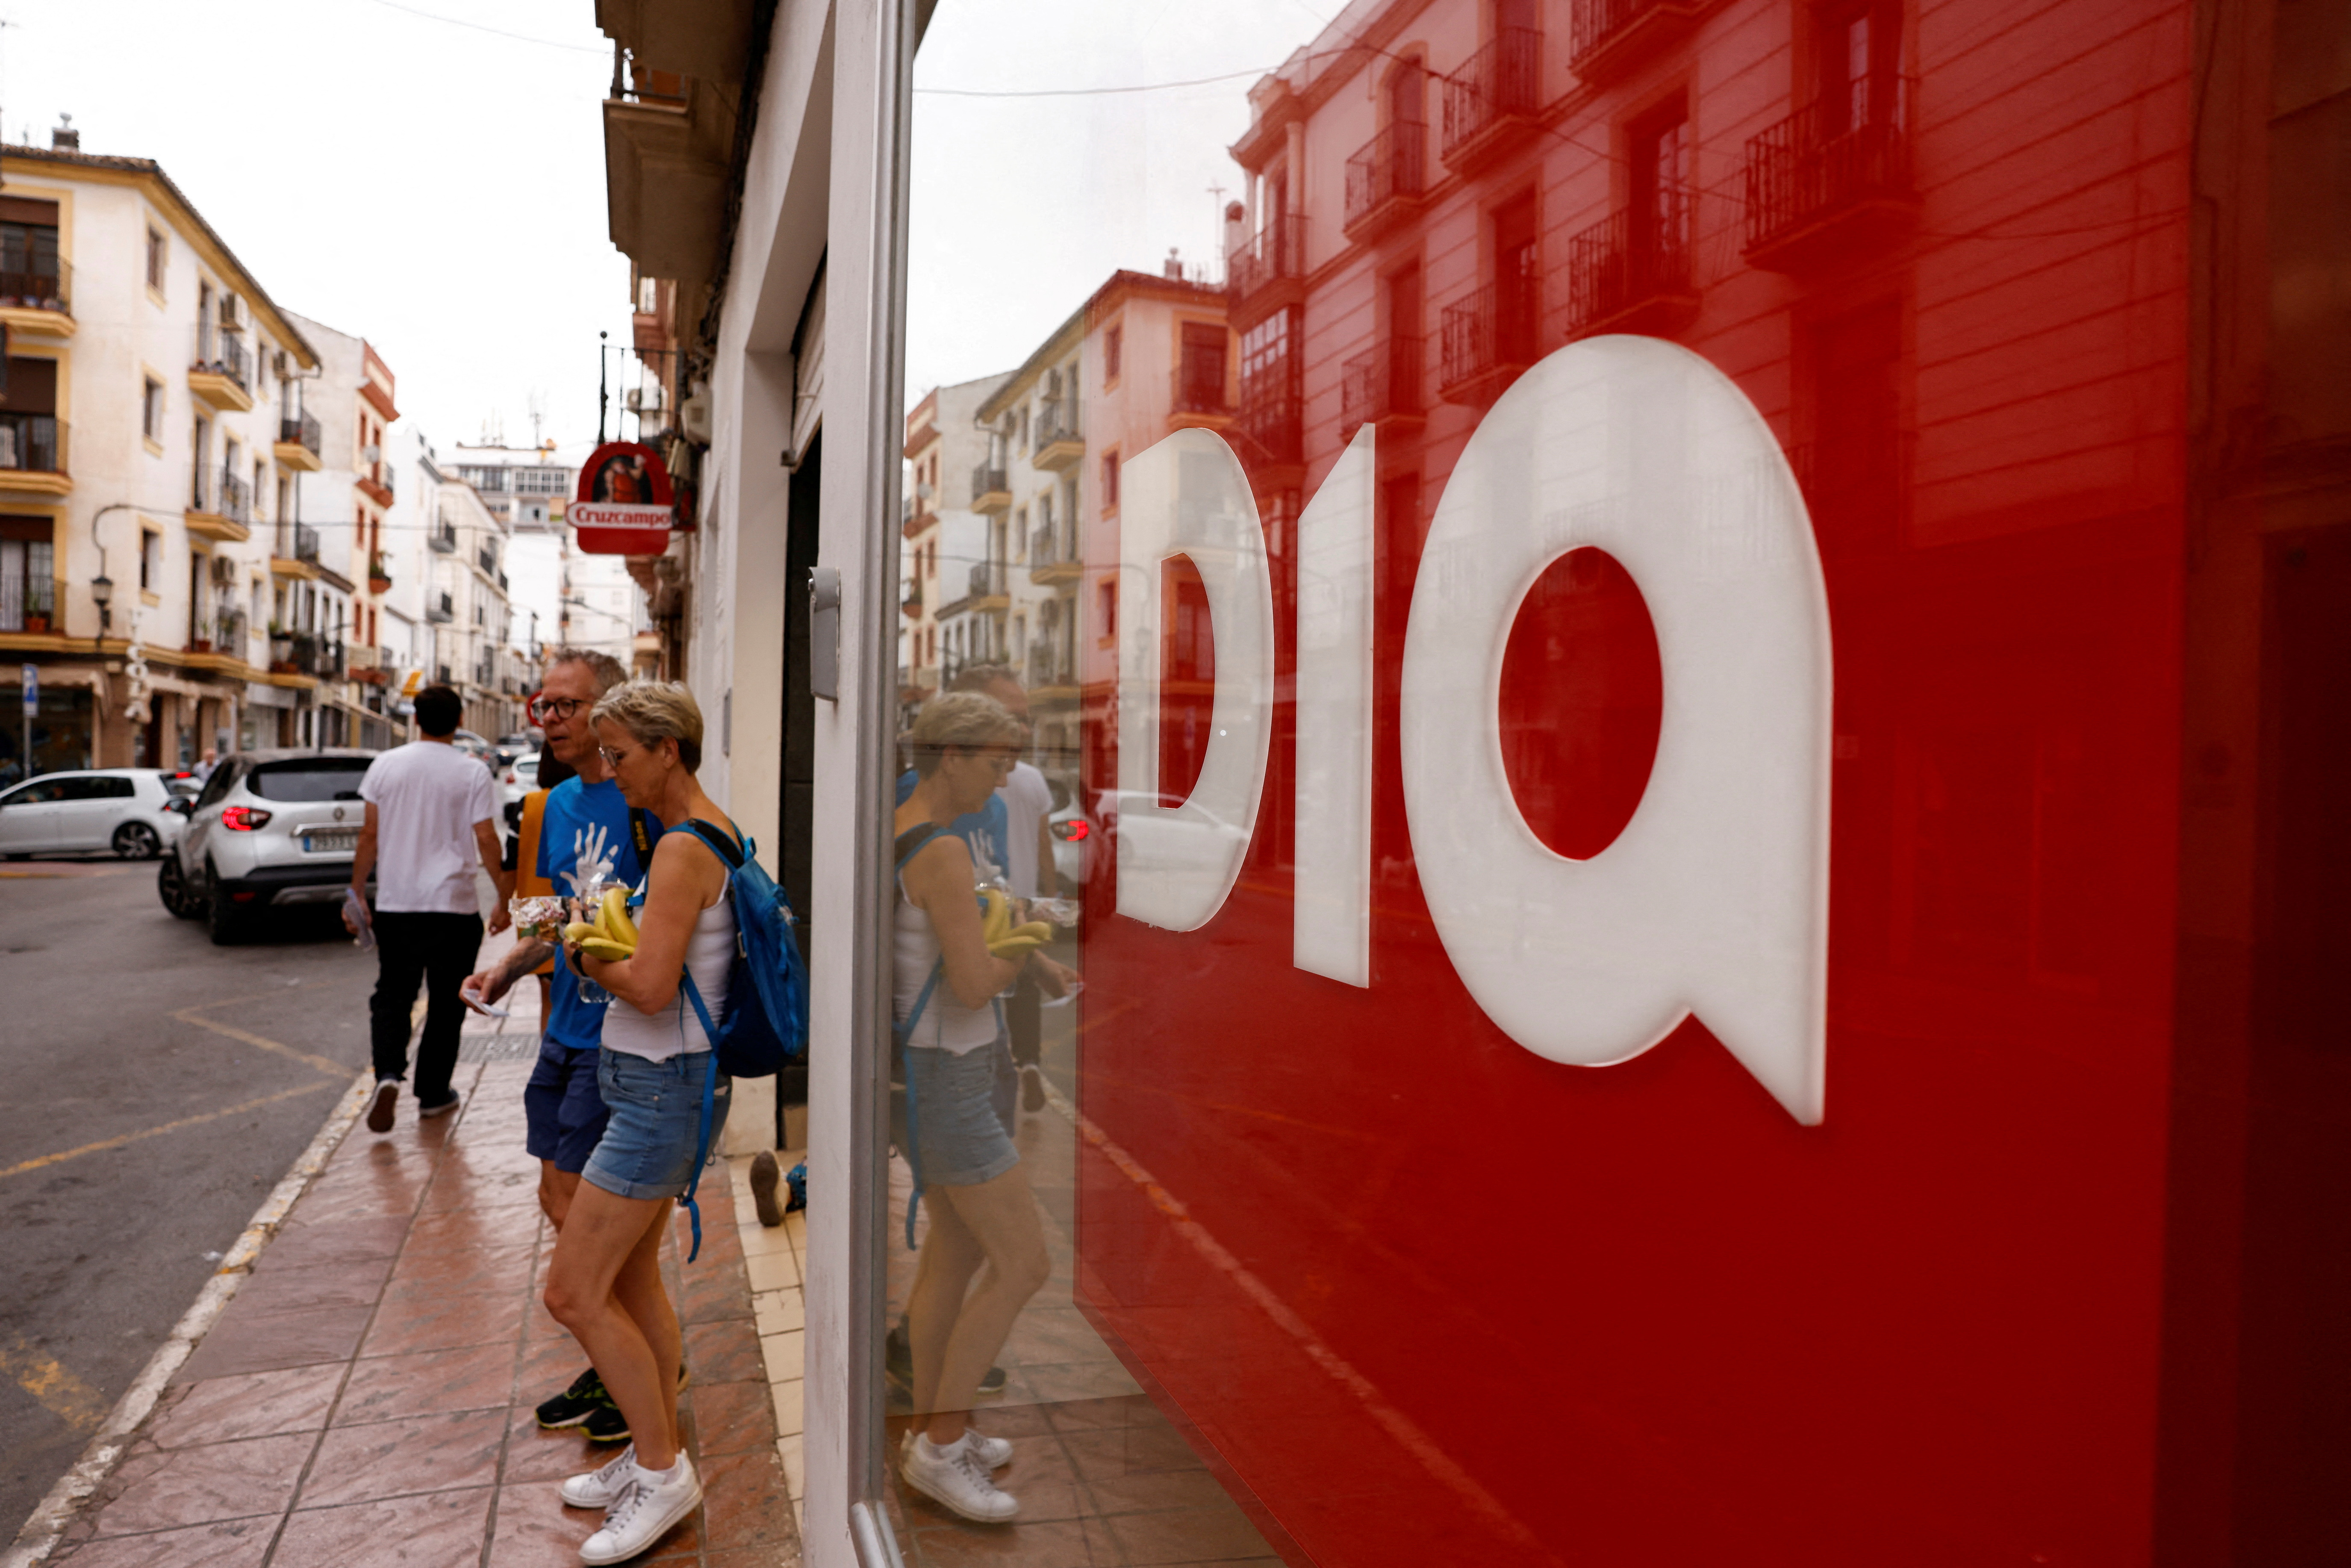 People leave a DIA supermarket in Ronda